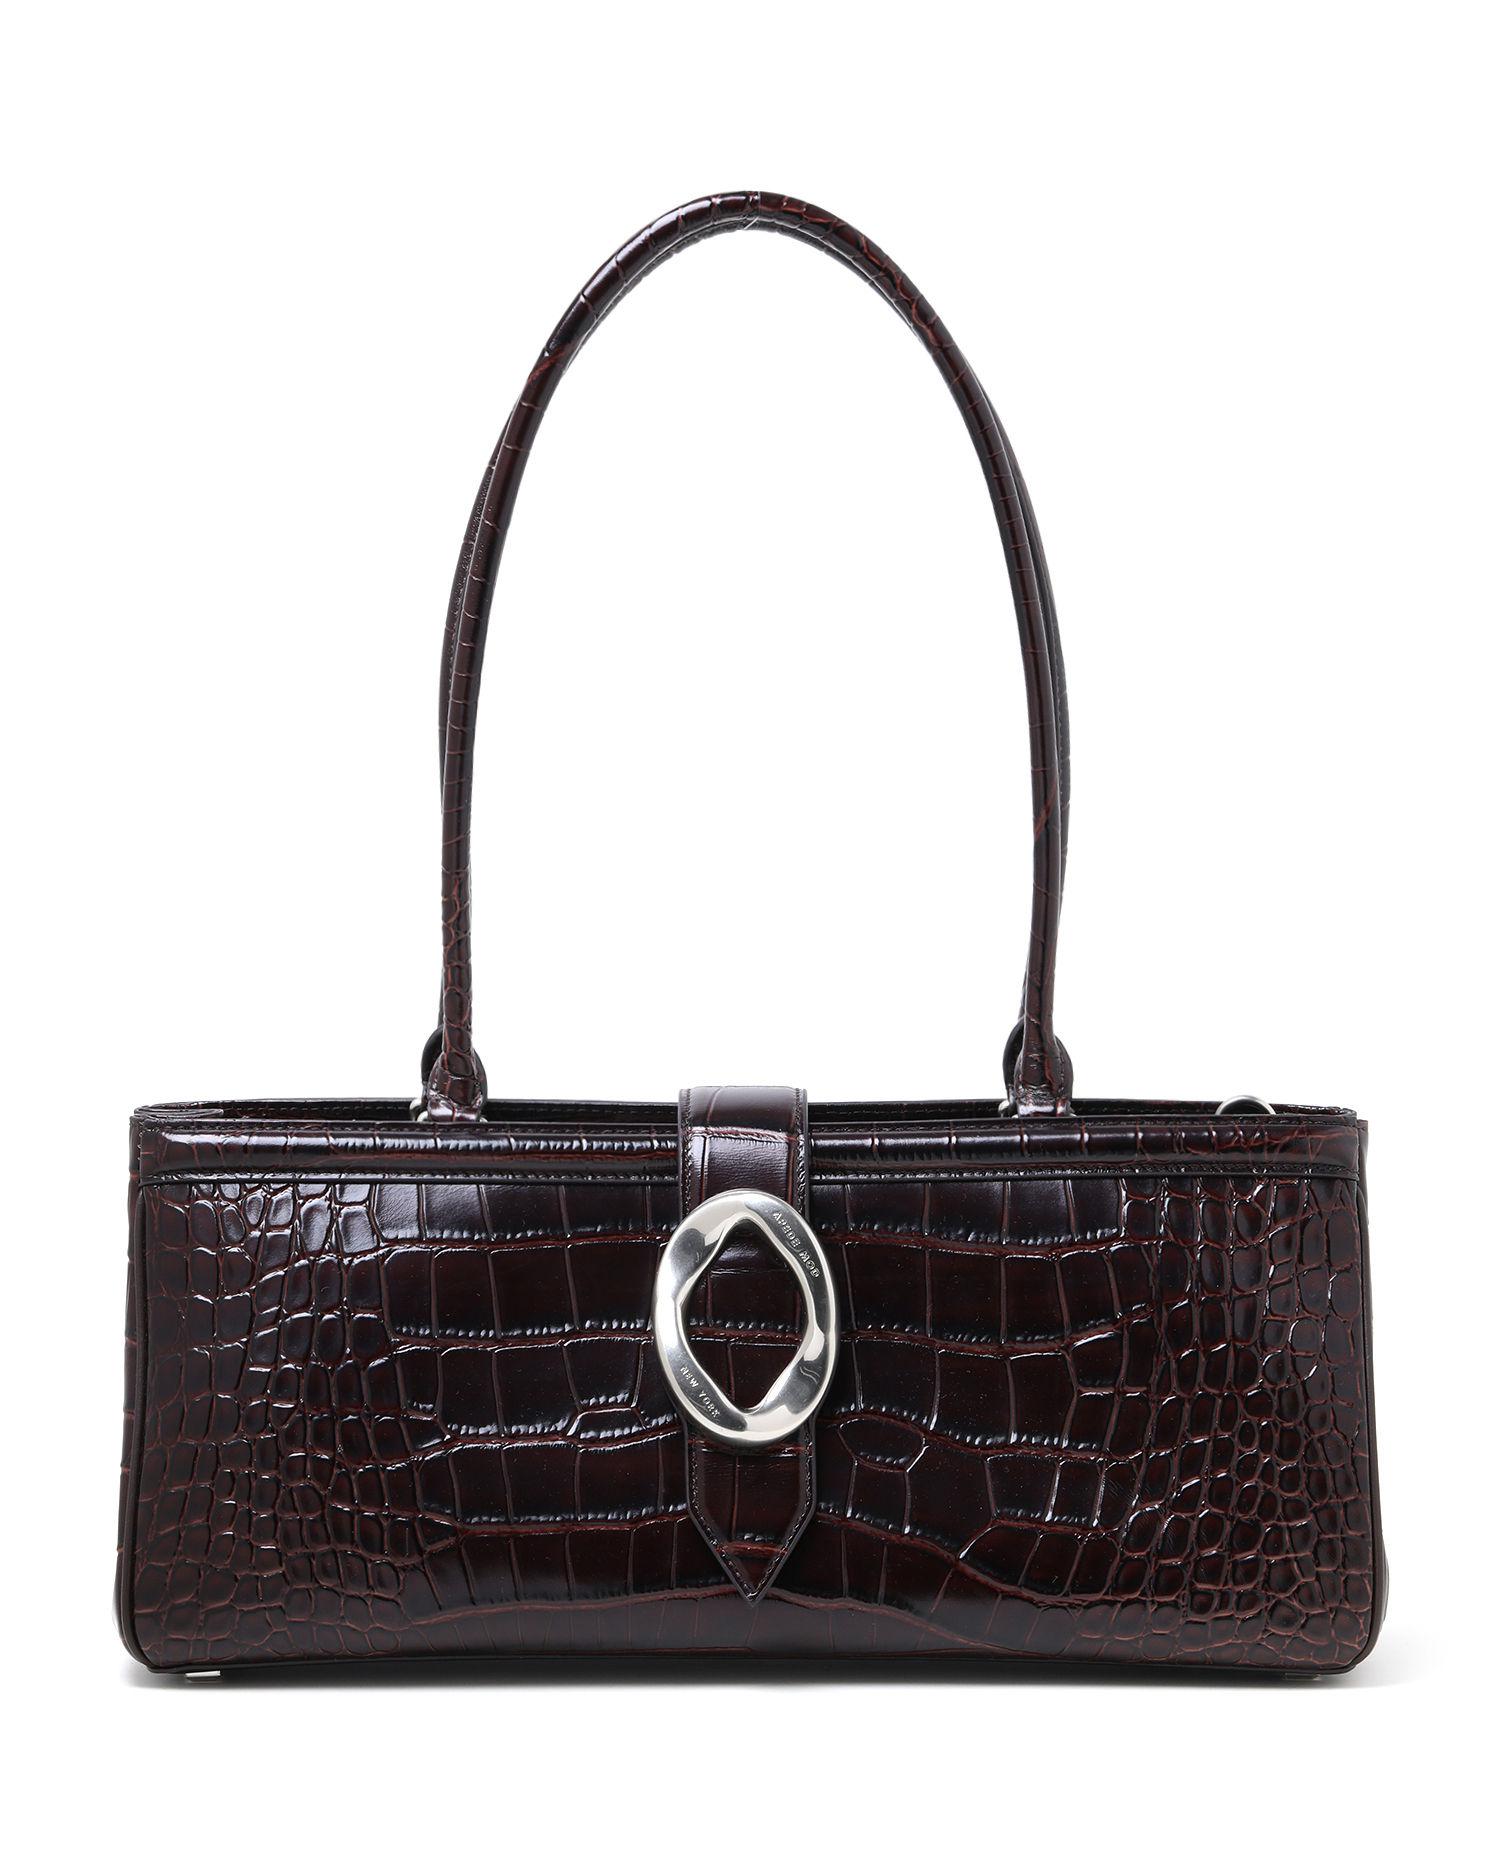 Jaqueline croc embossed leather tote bag by APEDE MOD